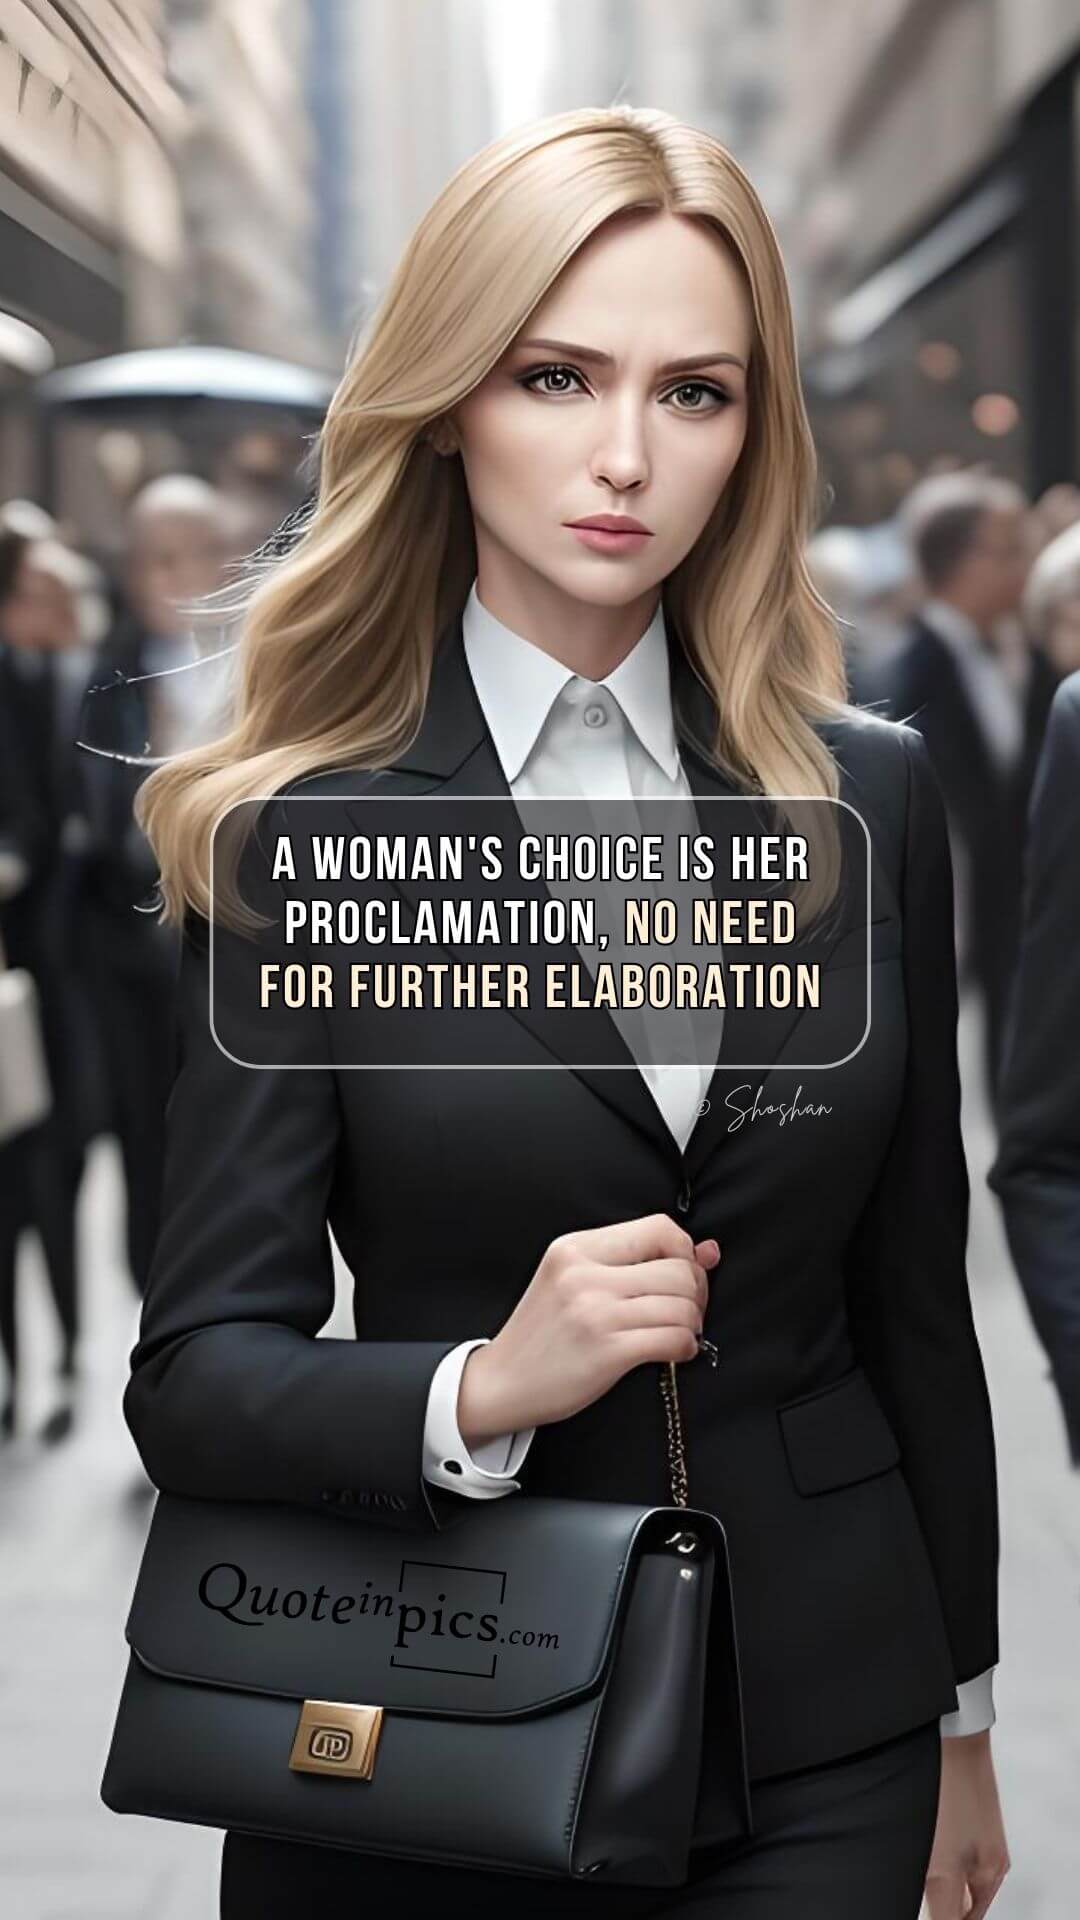 "A woman's choice is her proclamation, no need for further elaboration." © Shoshan